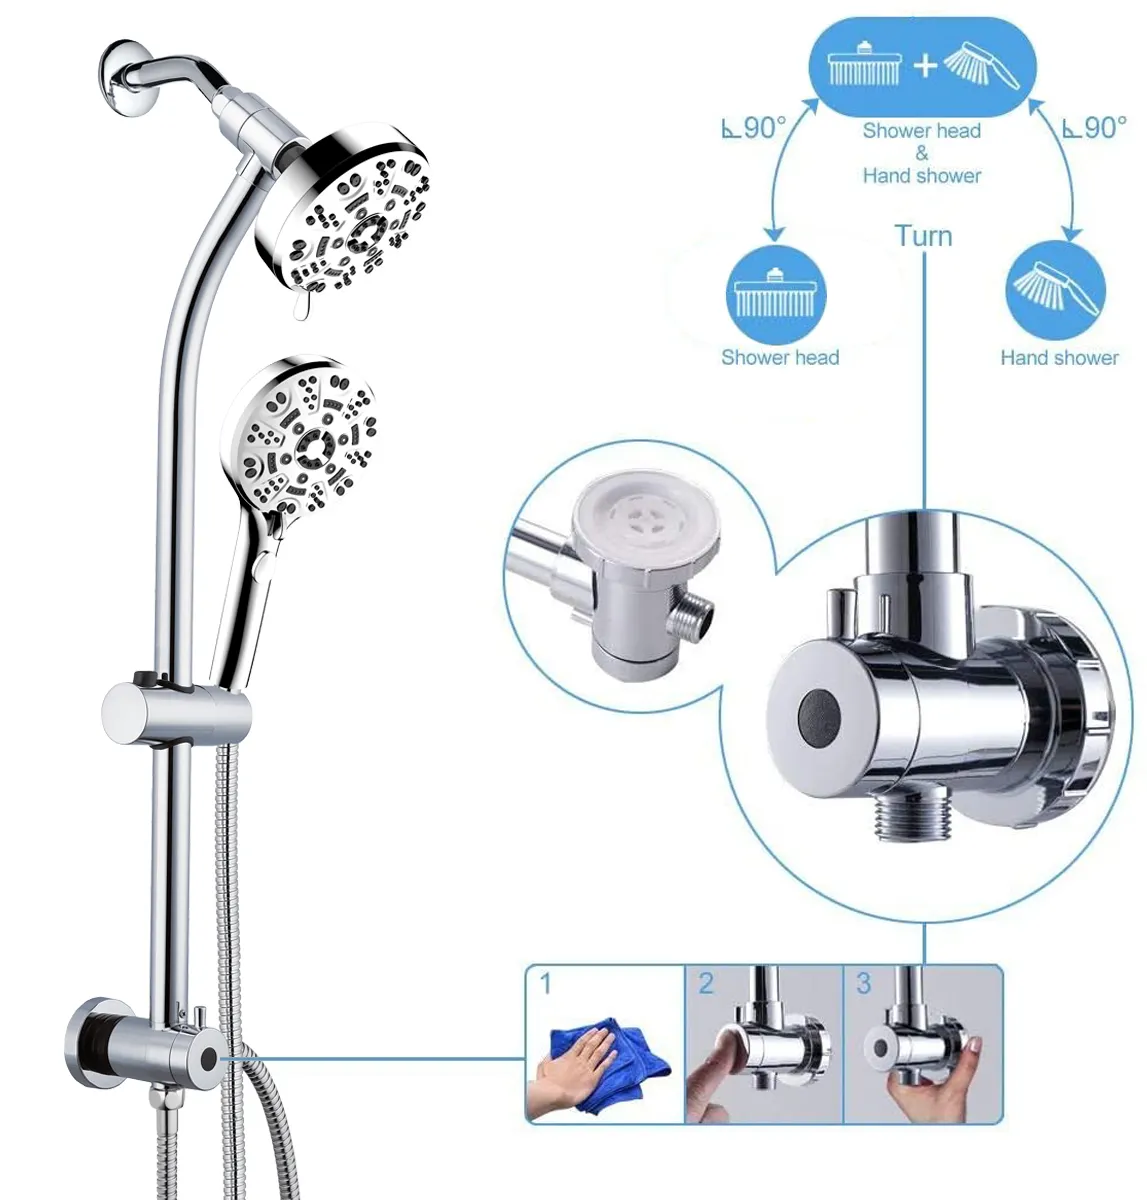 Dual Shower Head 3 way Spa System Chrome In Wall No-drill Shower Sliding Rail Set with Slide Bar